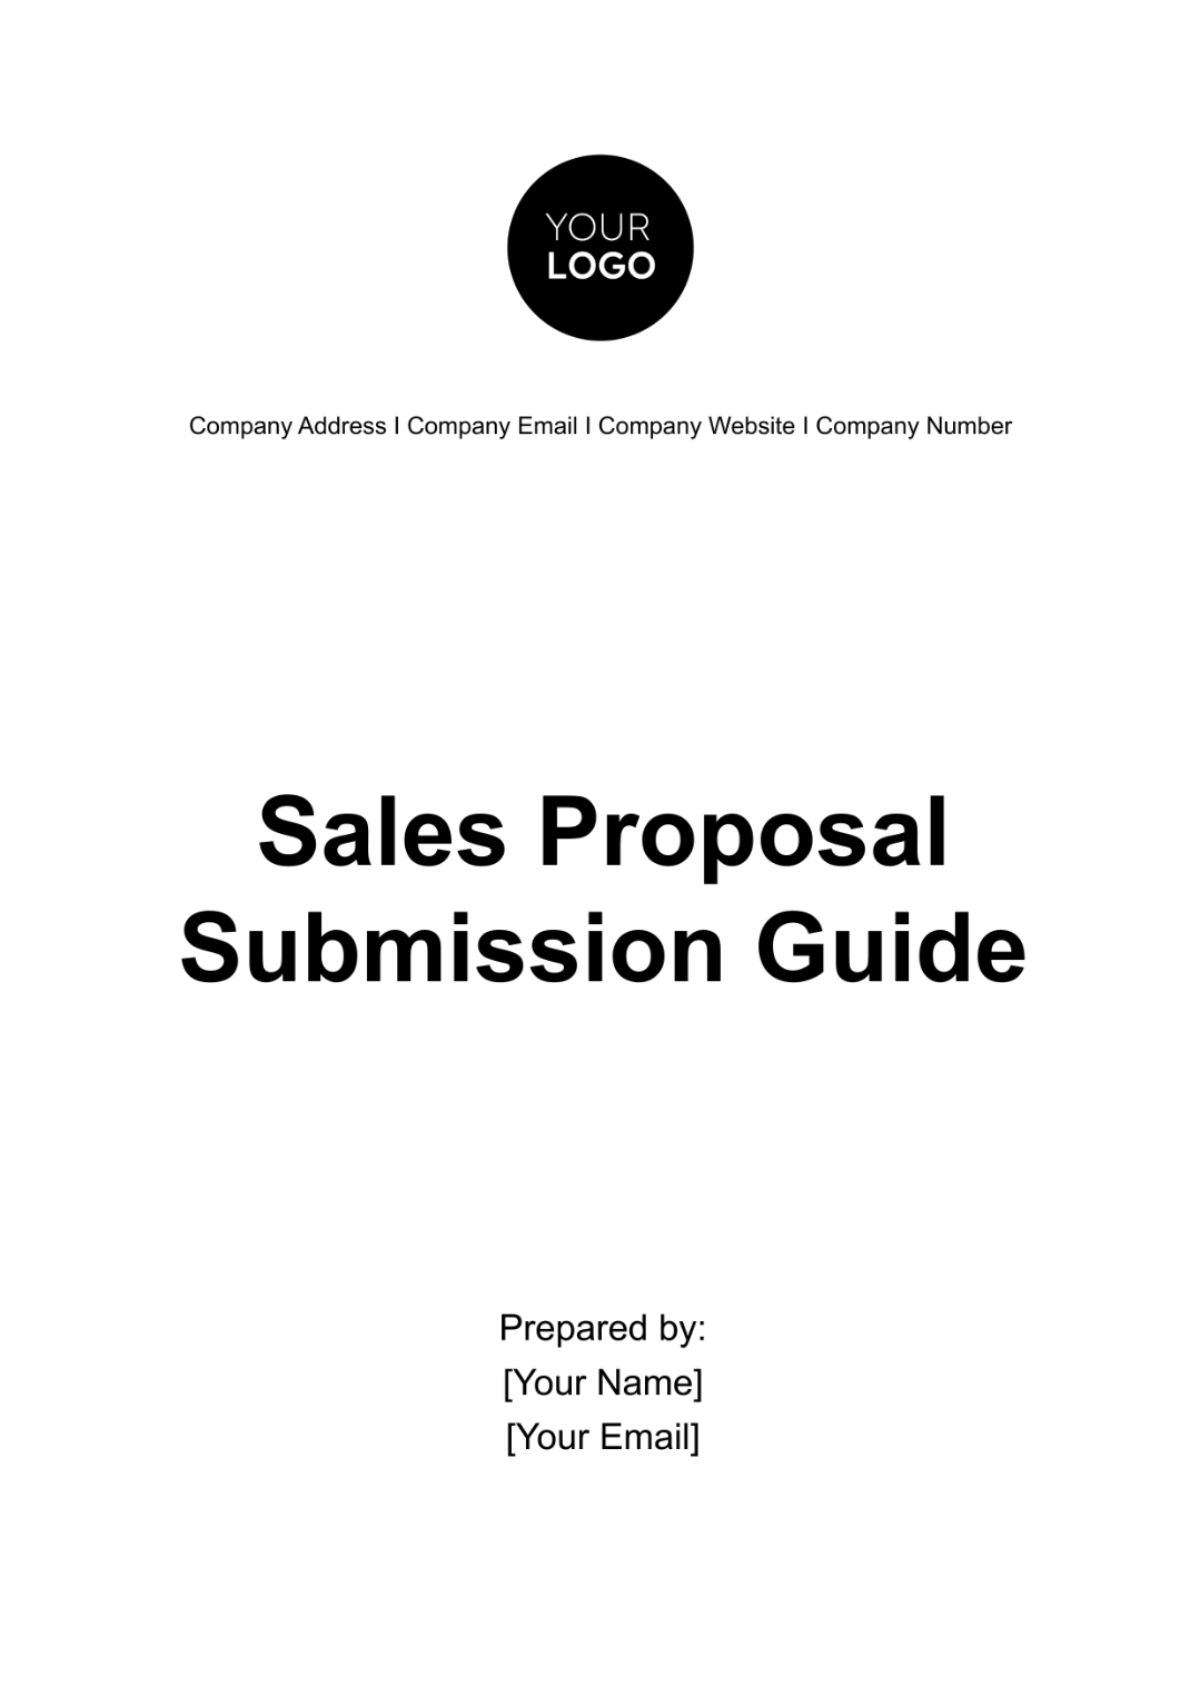 Free Sales Proposal Submission Guide Template